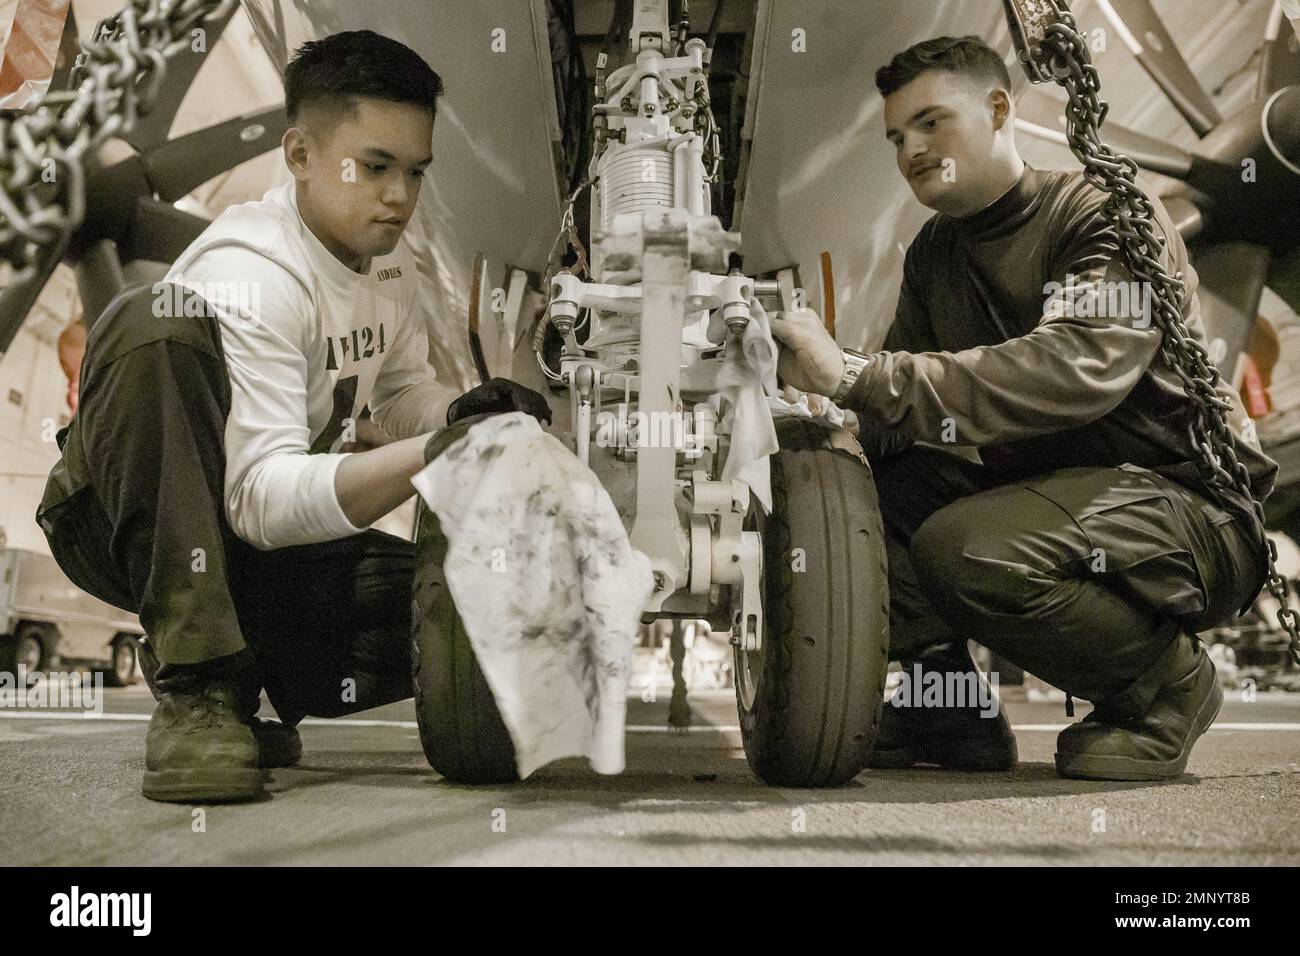 Aviation Structural Mechanic Airman John Andres, left, from South Cotabato, Philippines, and Aviation Structural Mechanic 3rd Class Aiden Burgess, from Charleston, South Carolina, both assigned to the 'Bear Aces' of Airborne Command and Control Squadron (VAW) 124, conduct routine maintenance on an E2-D Hawkeye in the hangar bay of the first-in-class aircraft carrier USS Gerald R. Ford (CVN 78), Oct. 7, 2022.  The Gerald R. Ford Carrier Strike Group (GRFCSG) is deployed in the Atlantic Ocean, conducting training and operations alongside NATO Allies and partners to enhance integration for future Stock Photo